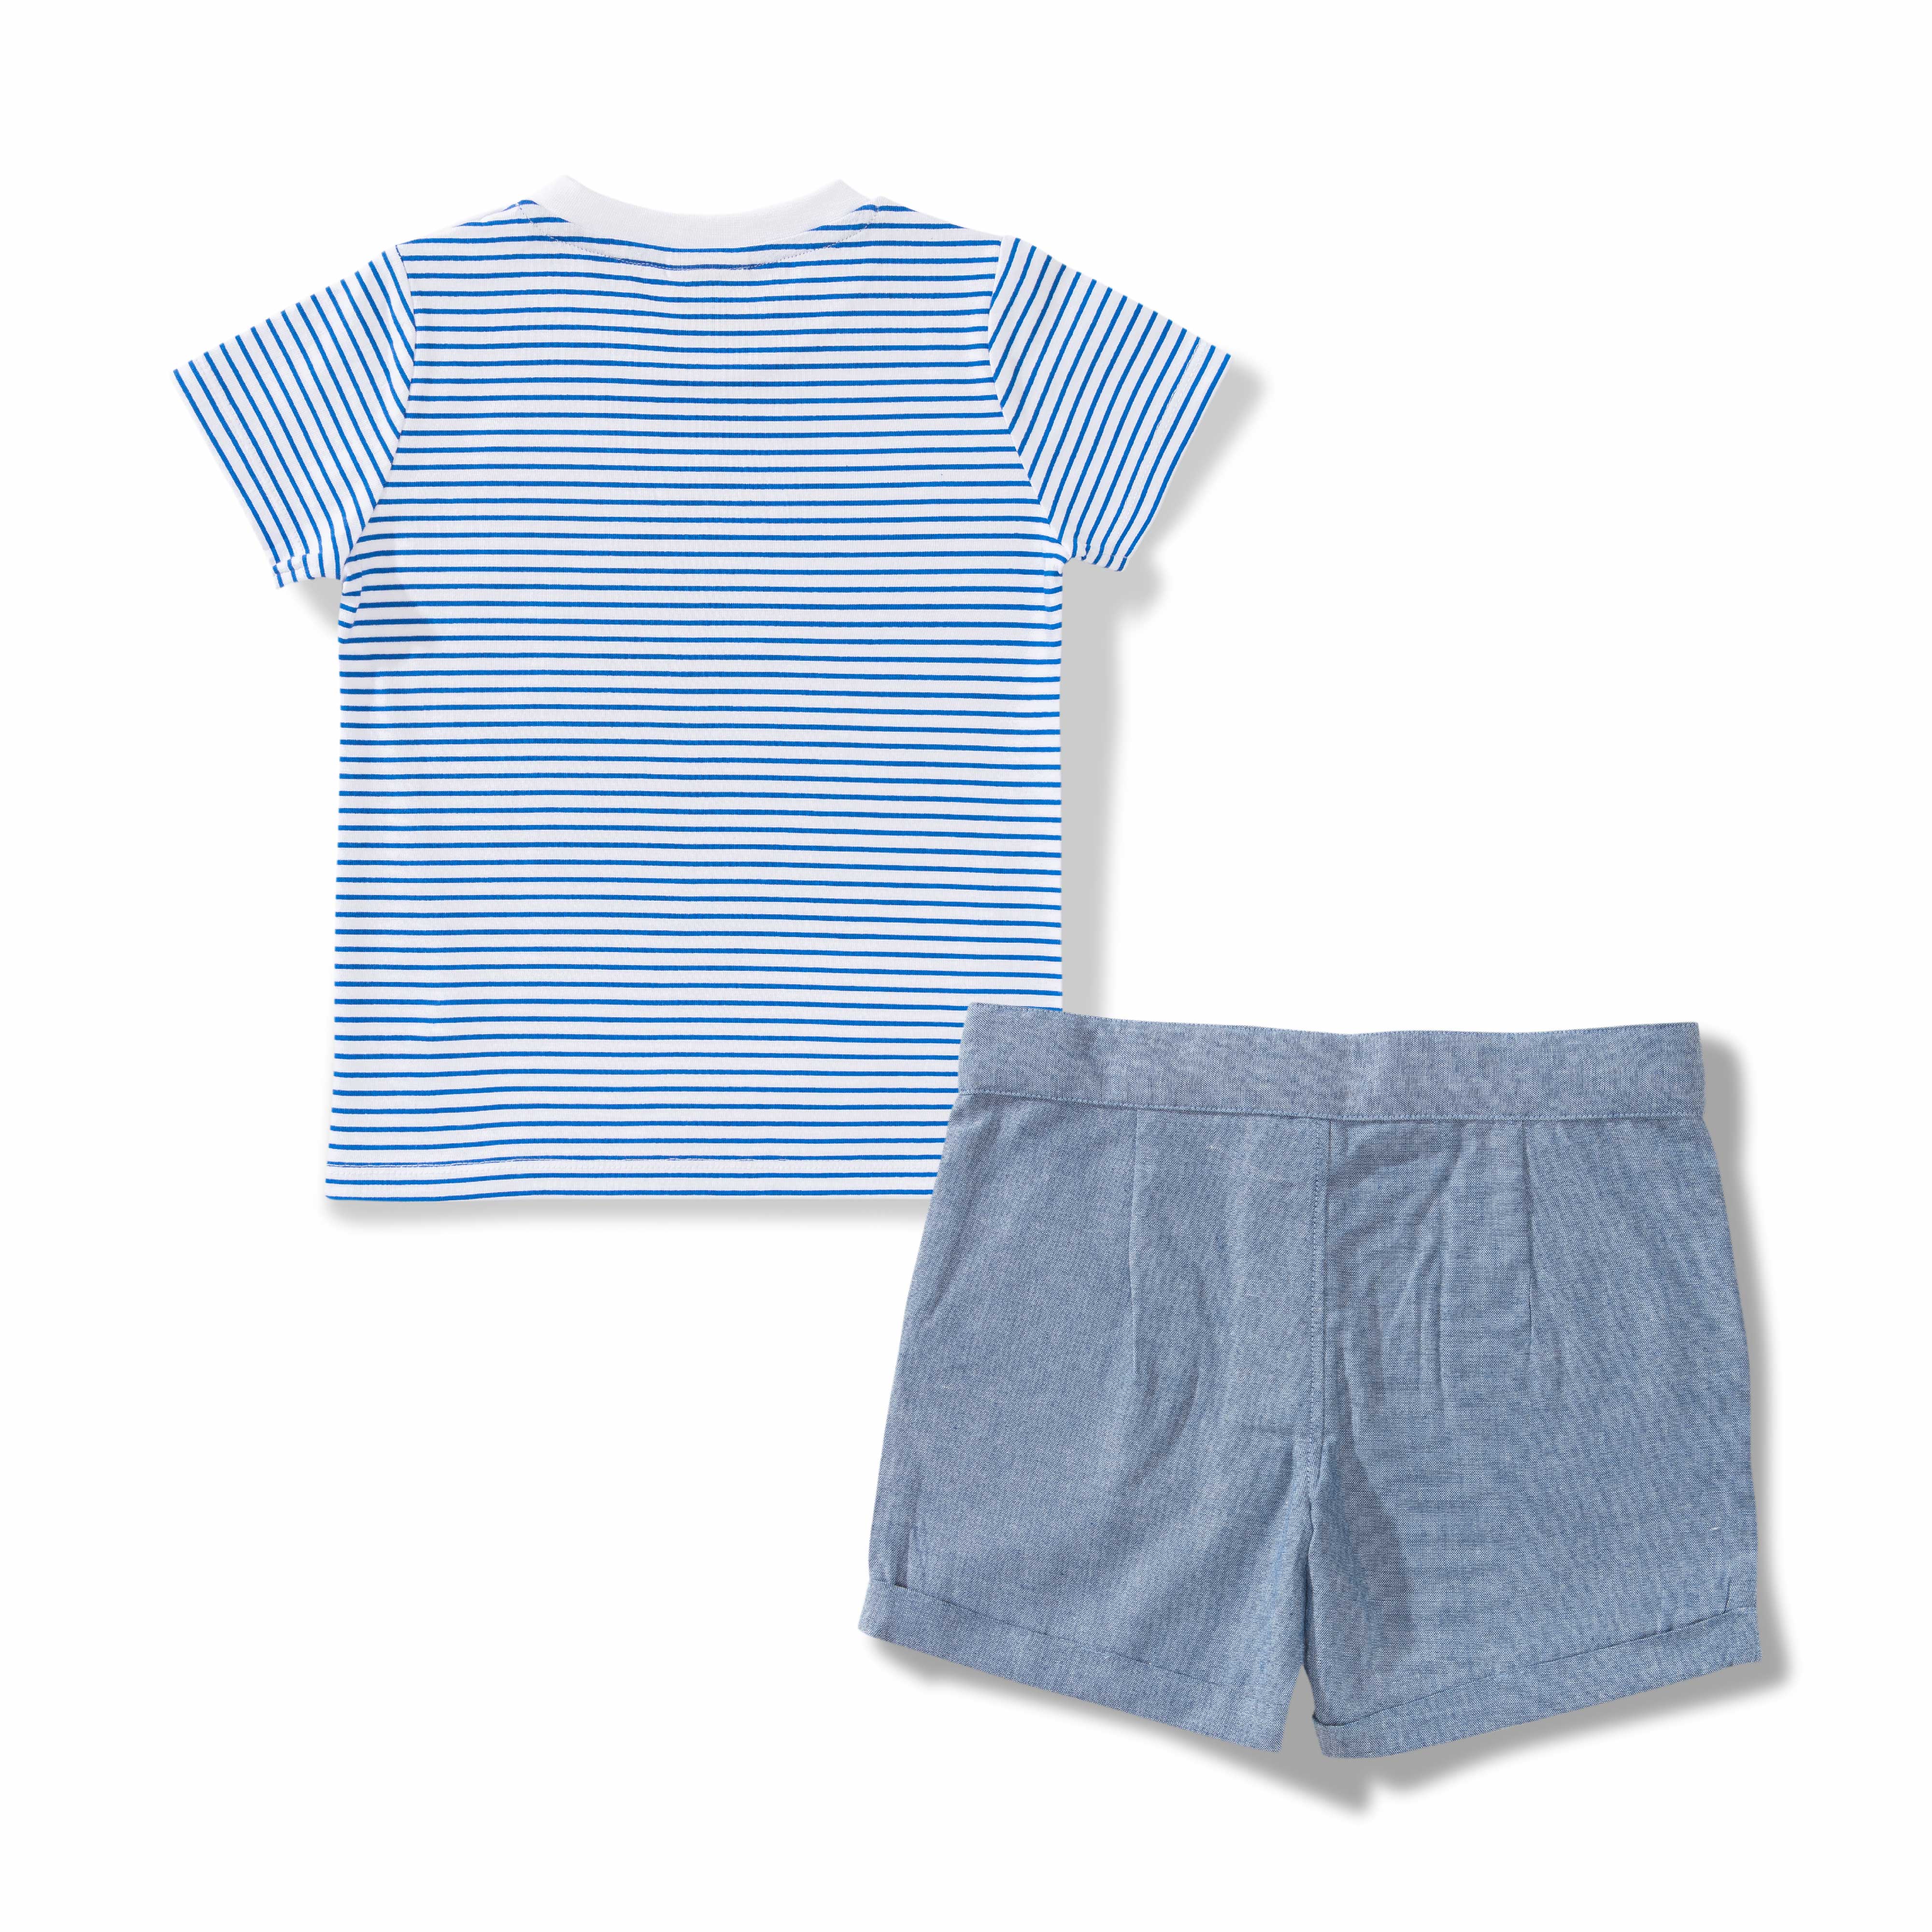 Baby Boys Striped & Little Dreamer Printed T Shirt & Solid Shorts Set